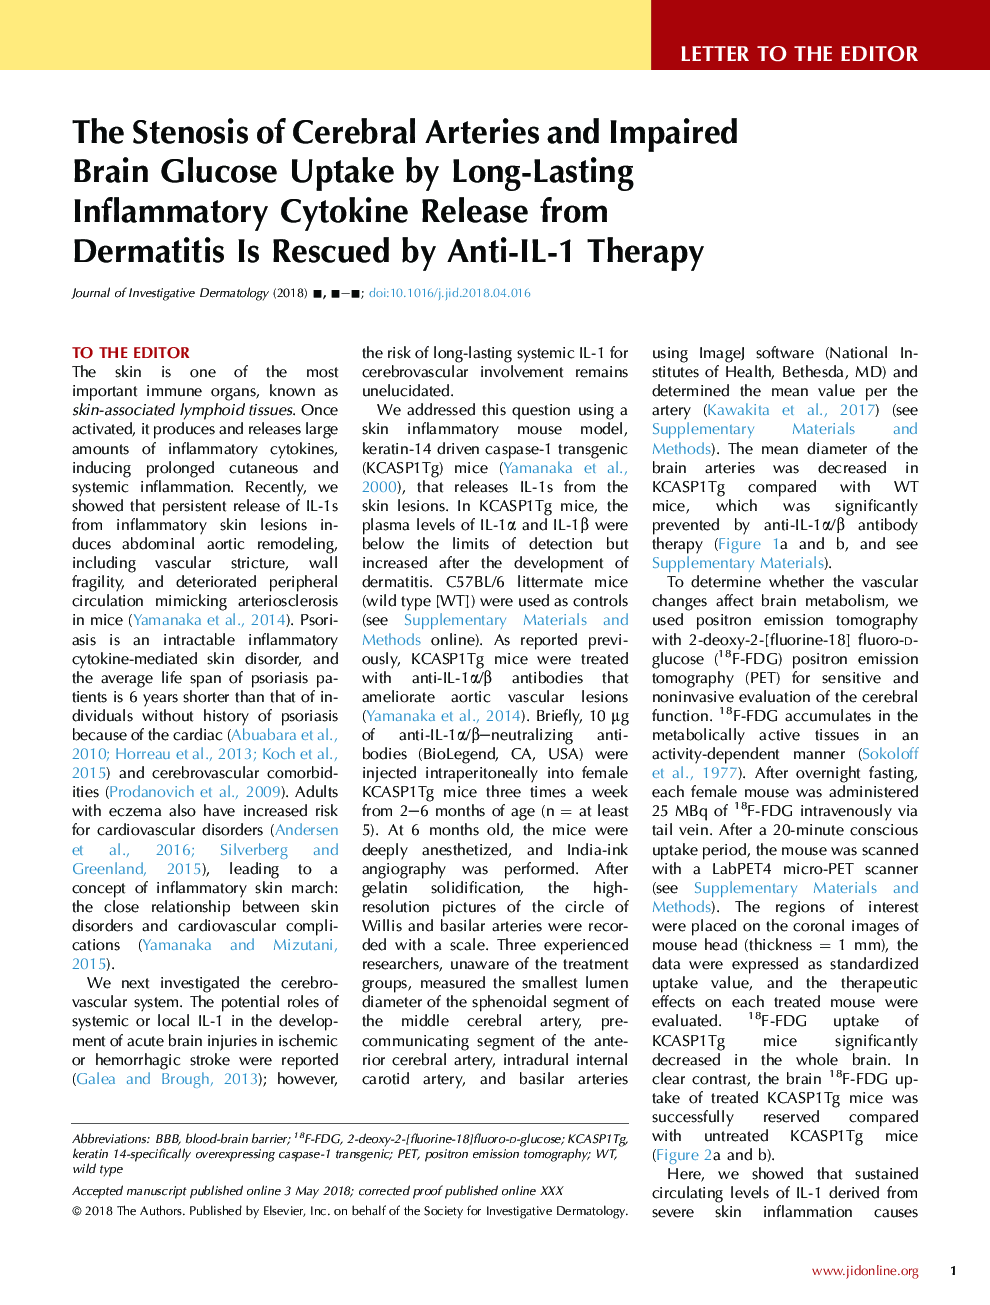 The Stenosis of Cerebral Arteries and Impaired BrainÂ Glucose Uptake by Long-Lasting InflammatoryÂ Cytokine Release from DermatitisÂ IsÂ Rescued by Anti-IL-1 Therapy